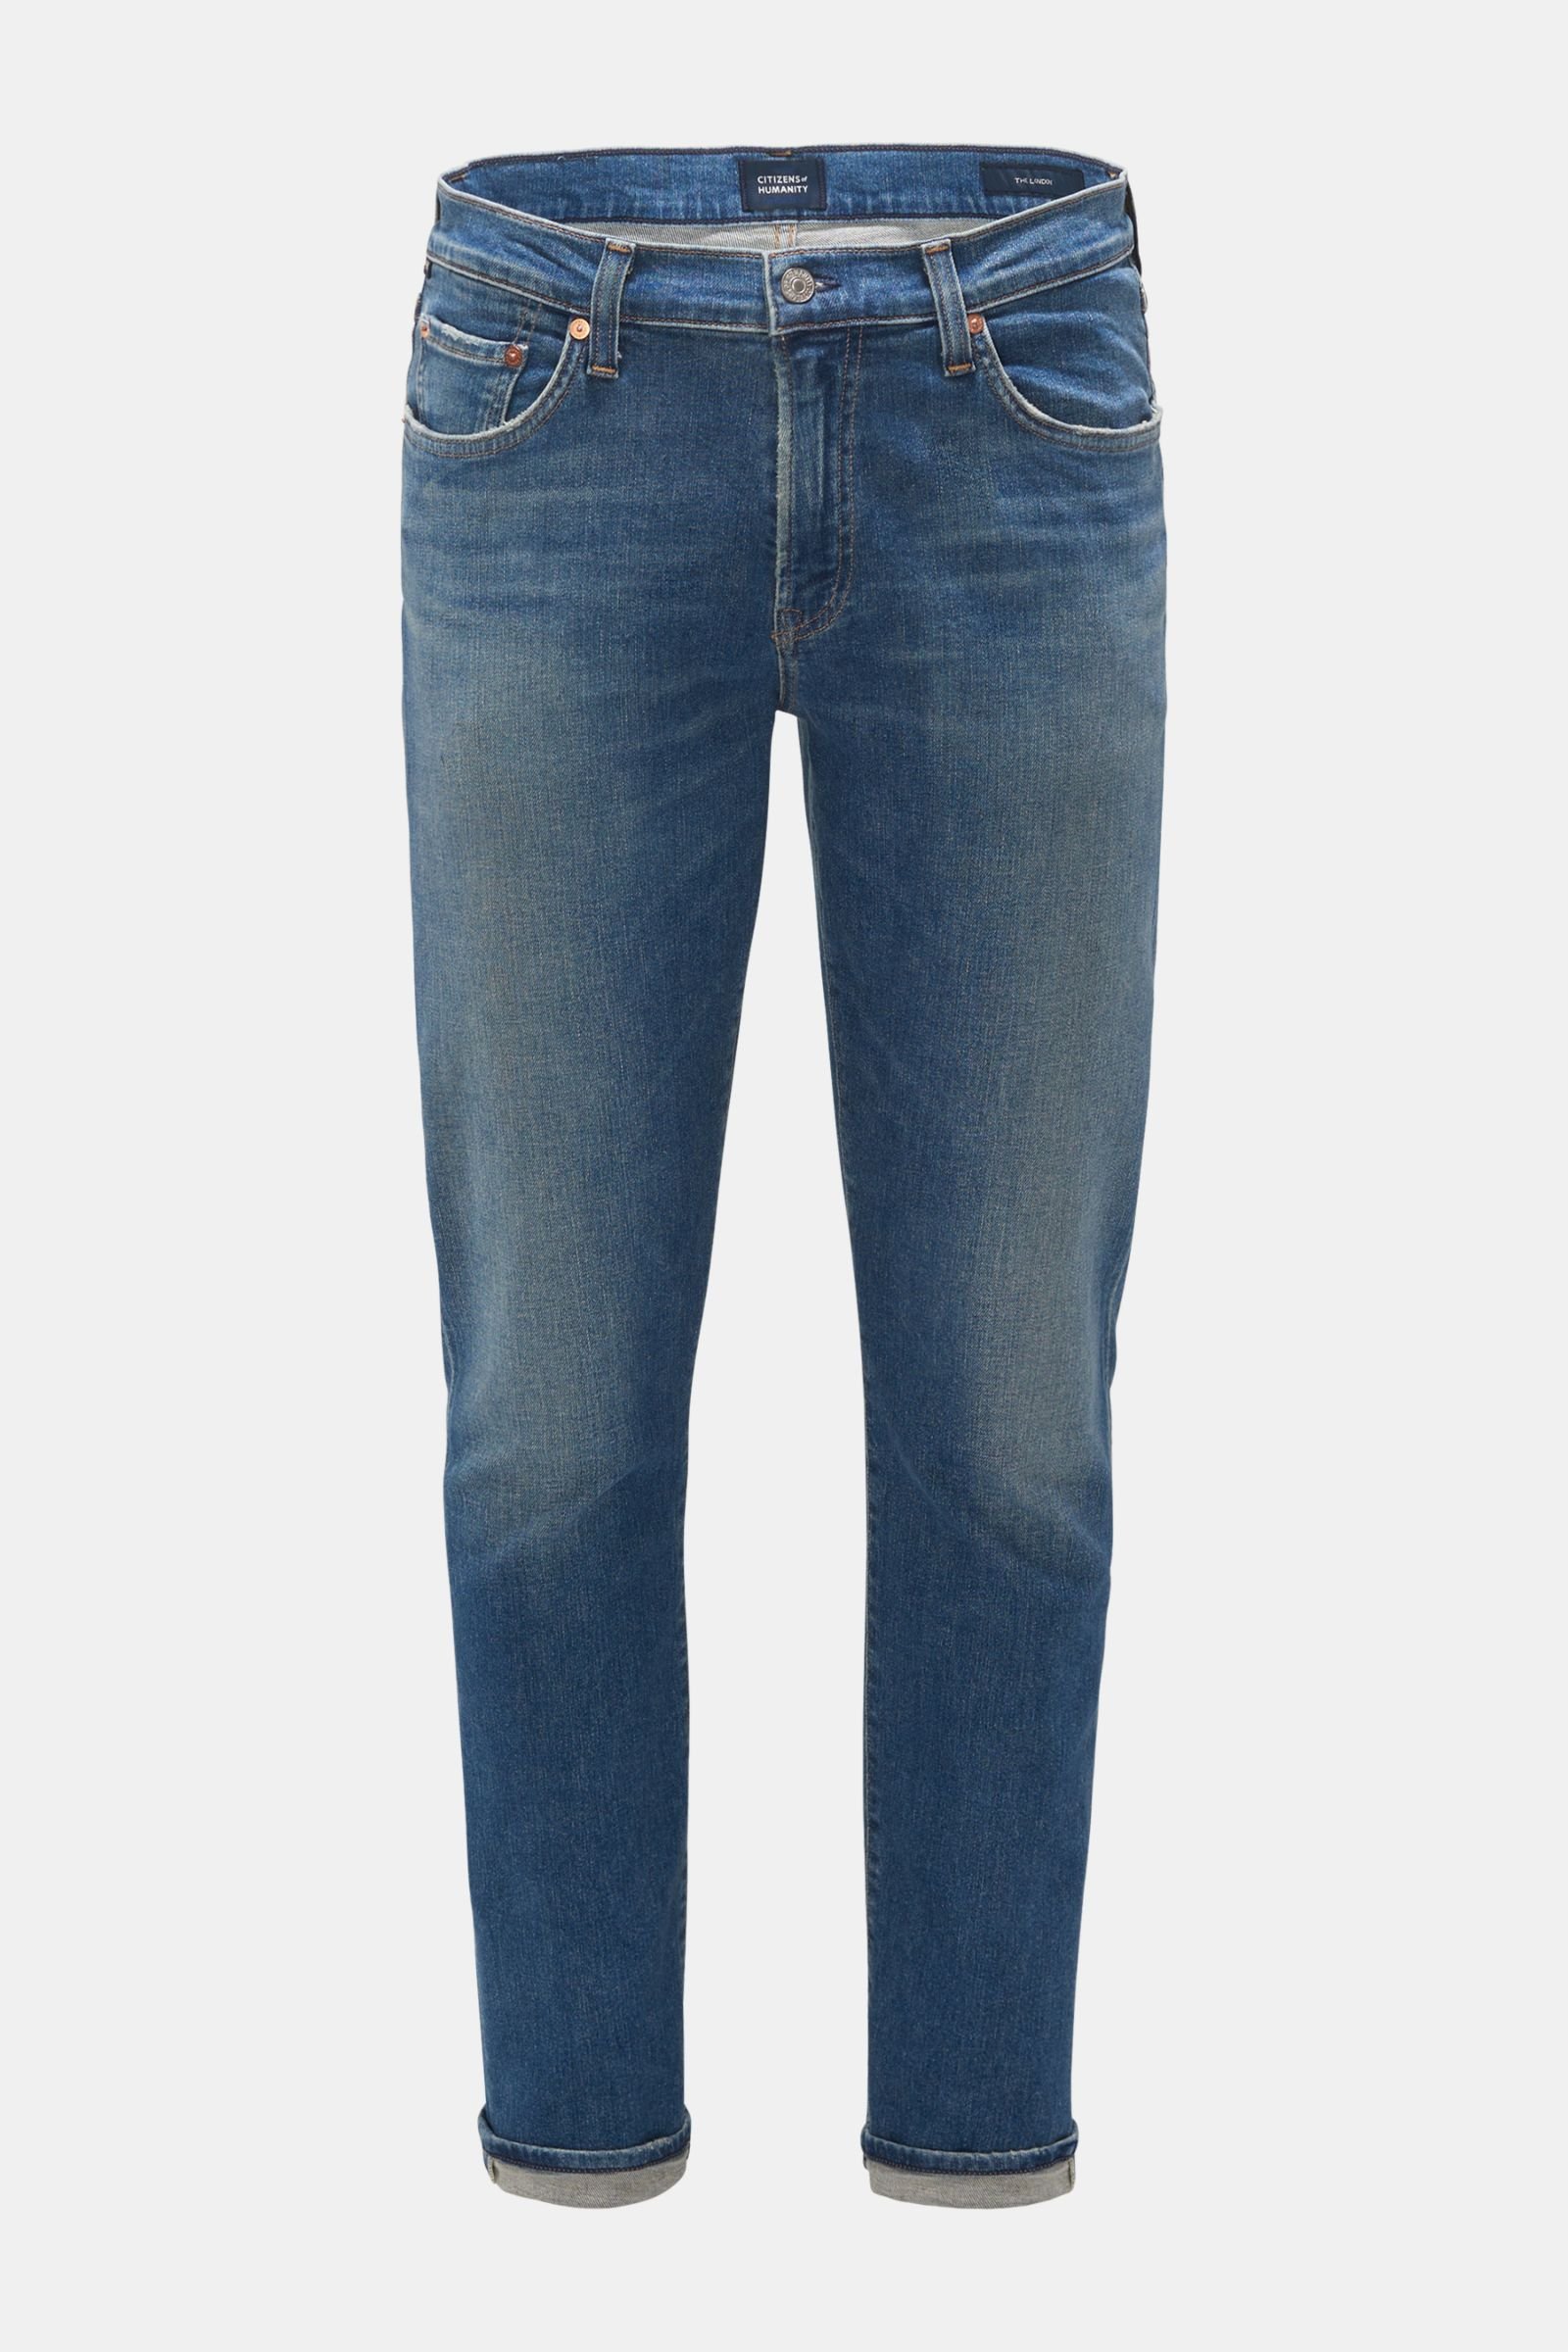 Jeans 'The London' grey-blue